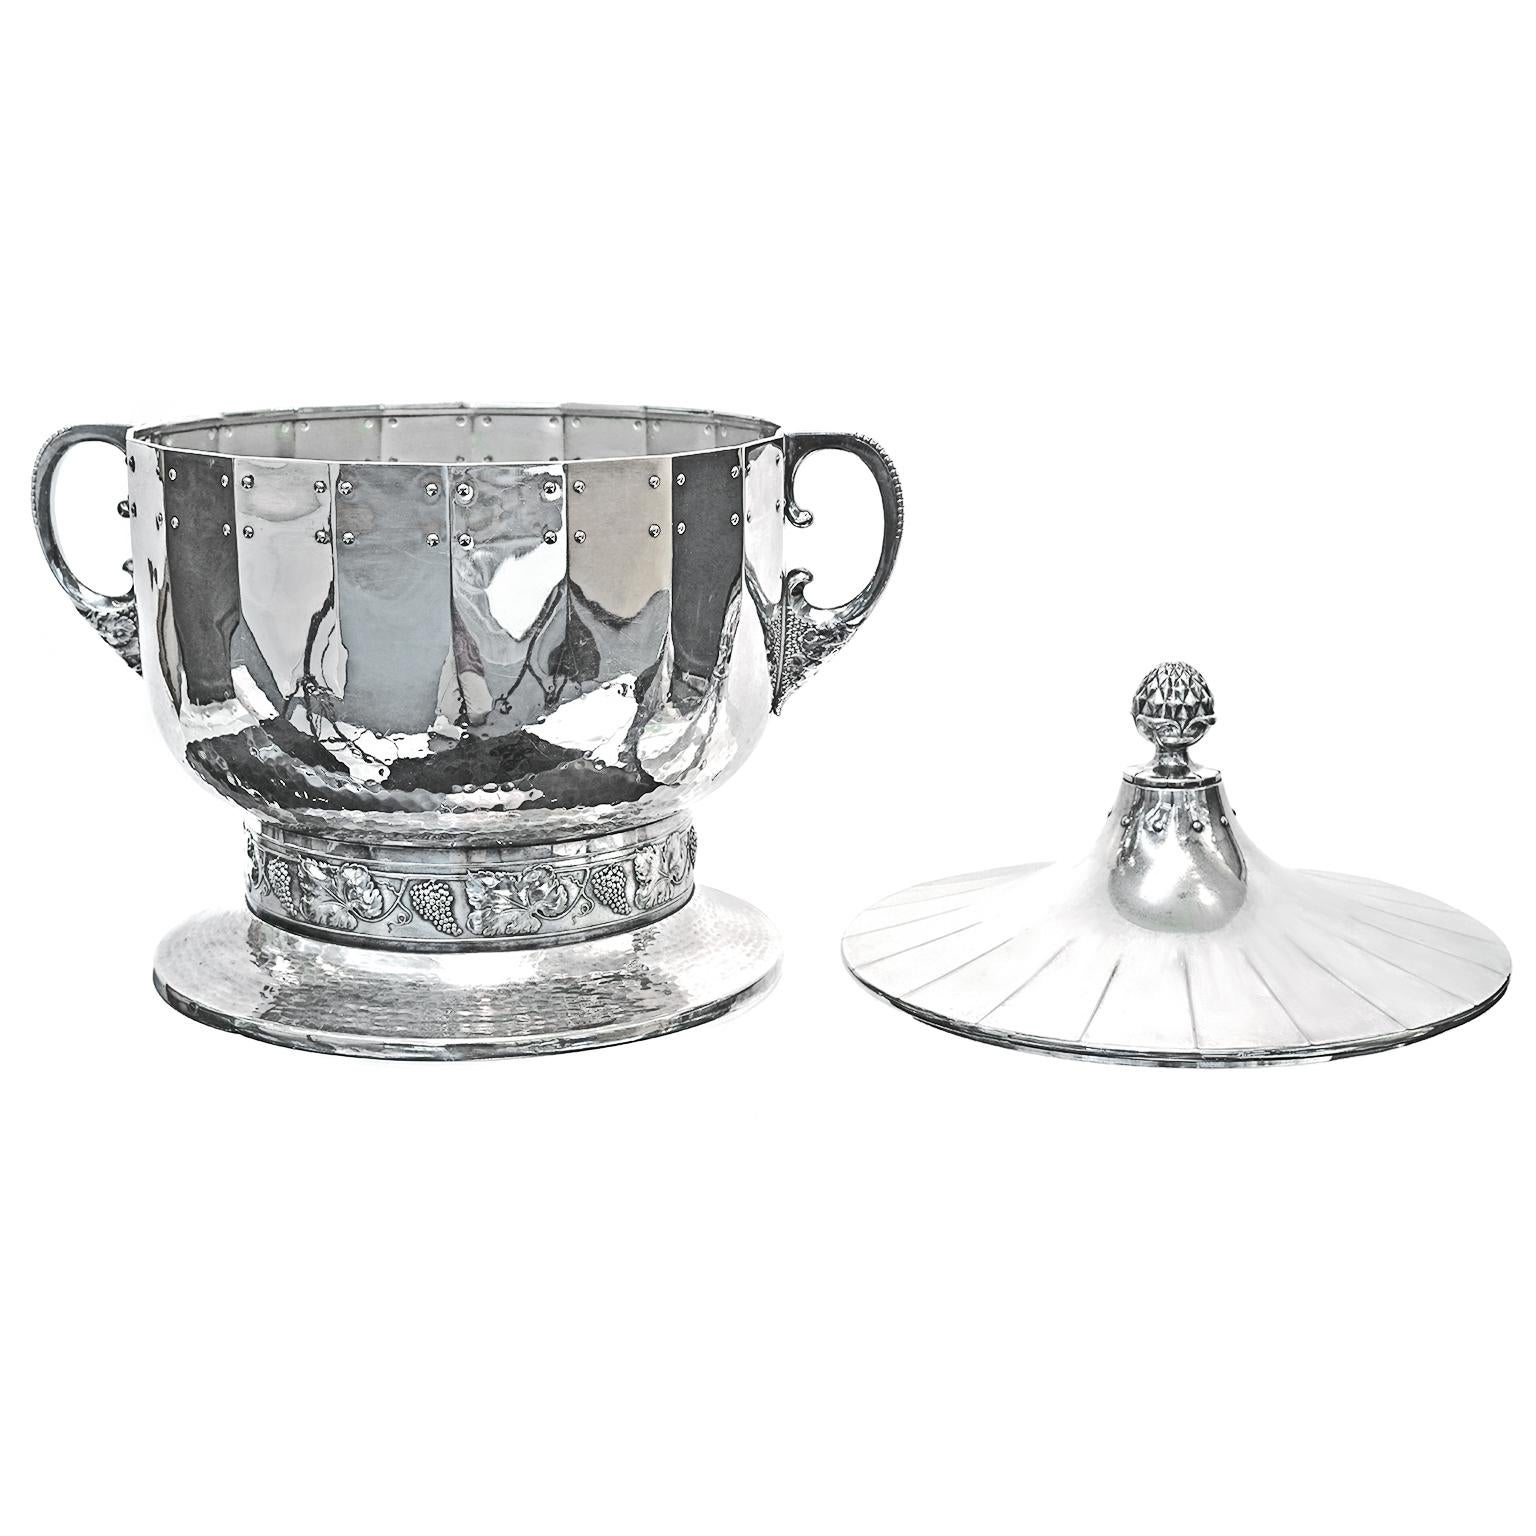 German Monumental Silver Plate Centerpiece by WMF